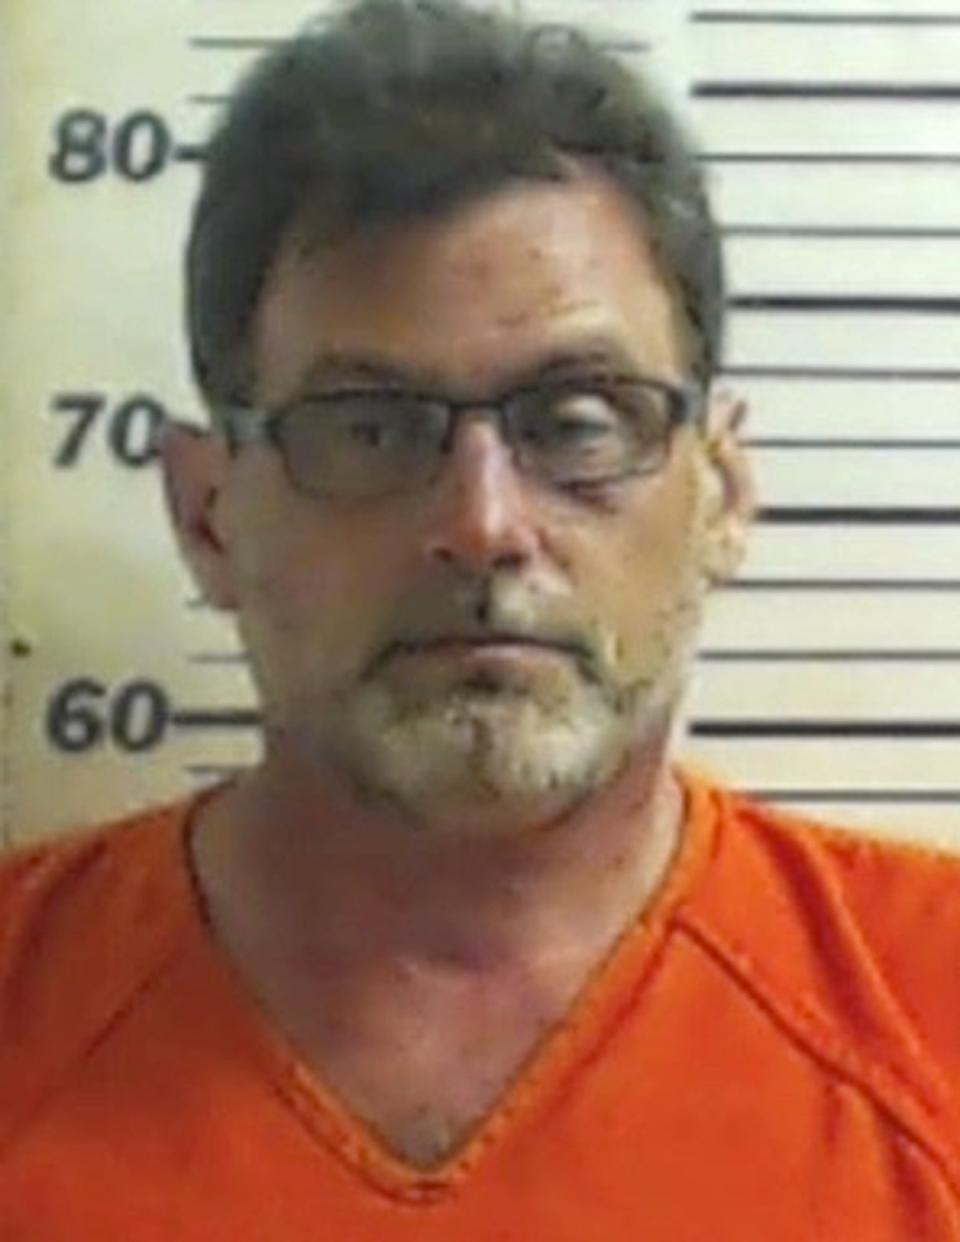 Arthur Jensen pictured in mugshot (Iroquois County Sheriff’s Department)